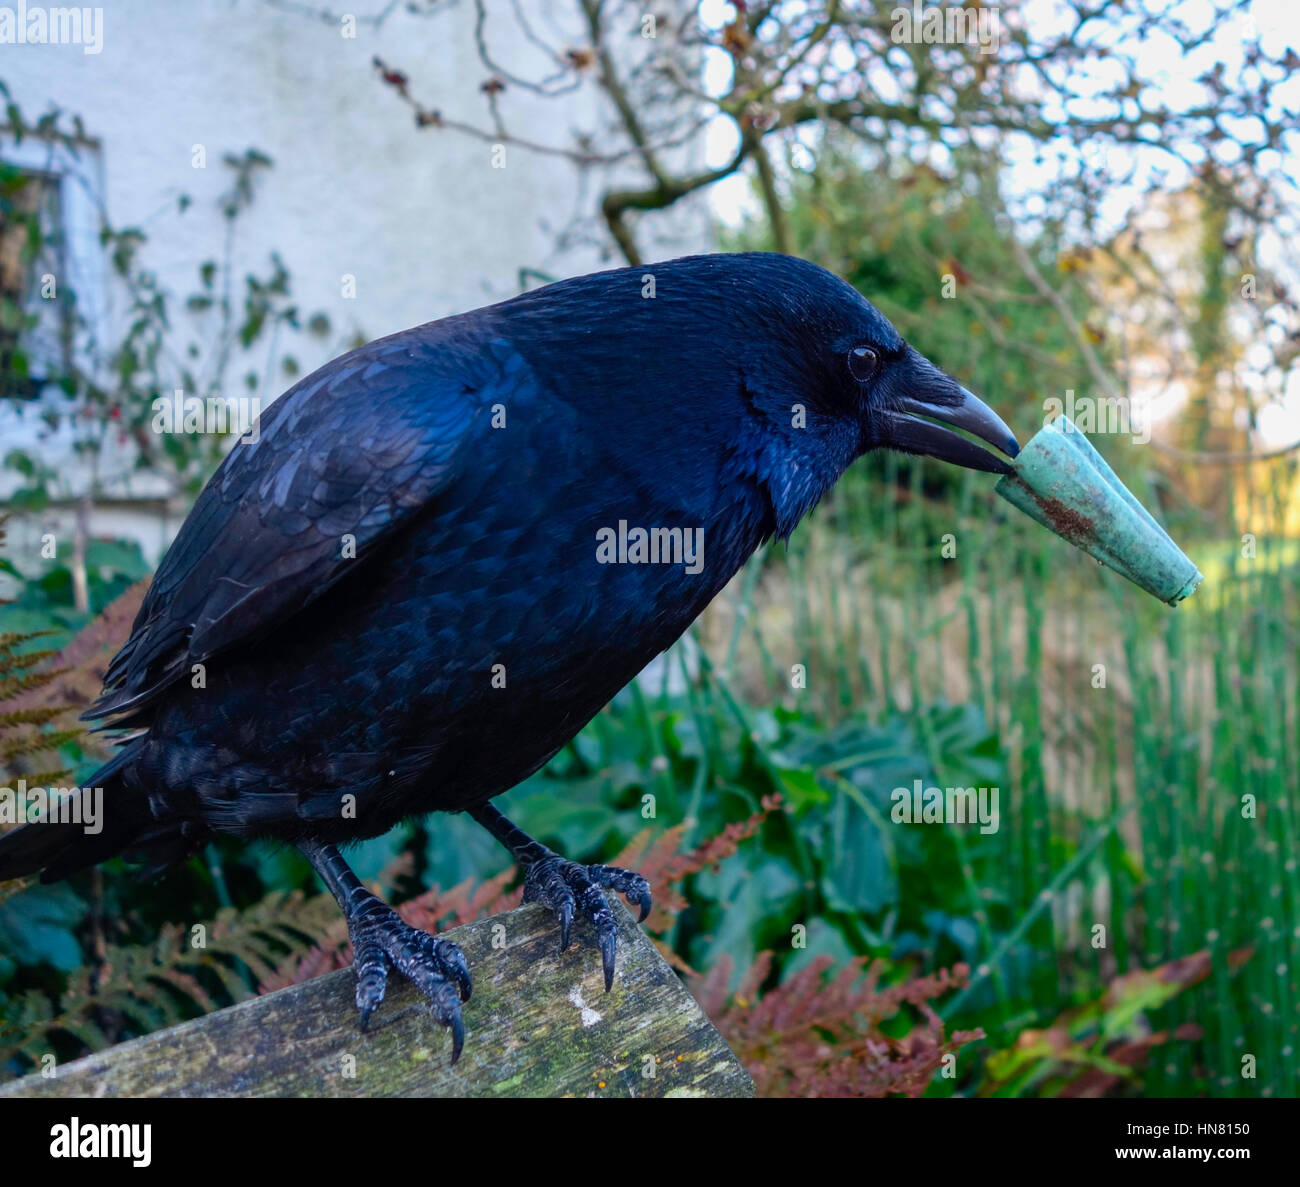 Crow with beak extension Colyford, Devon, England 9th February 2017 Wild Crow playing with a rubber cane joiner perched on a bench. The cane top holder makes it look as if the bird has a beak extension John Swithinbank/Alamy Live News Stock Photo